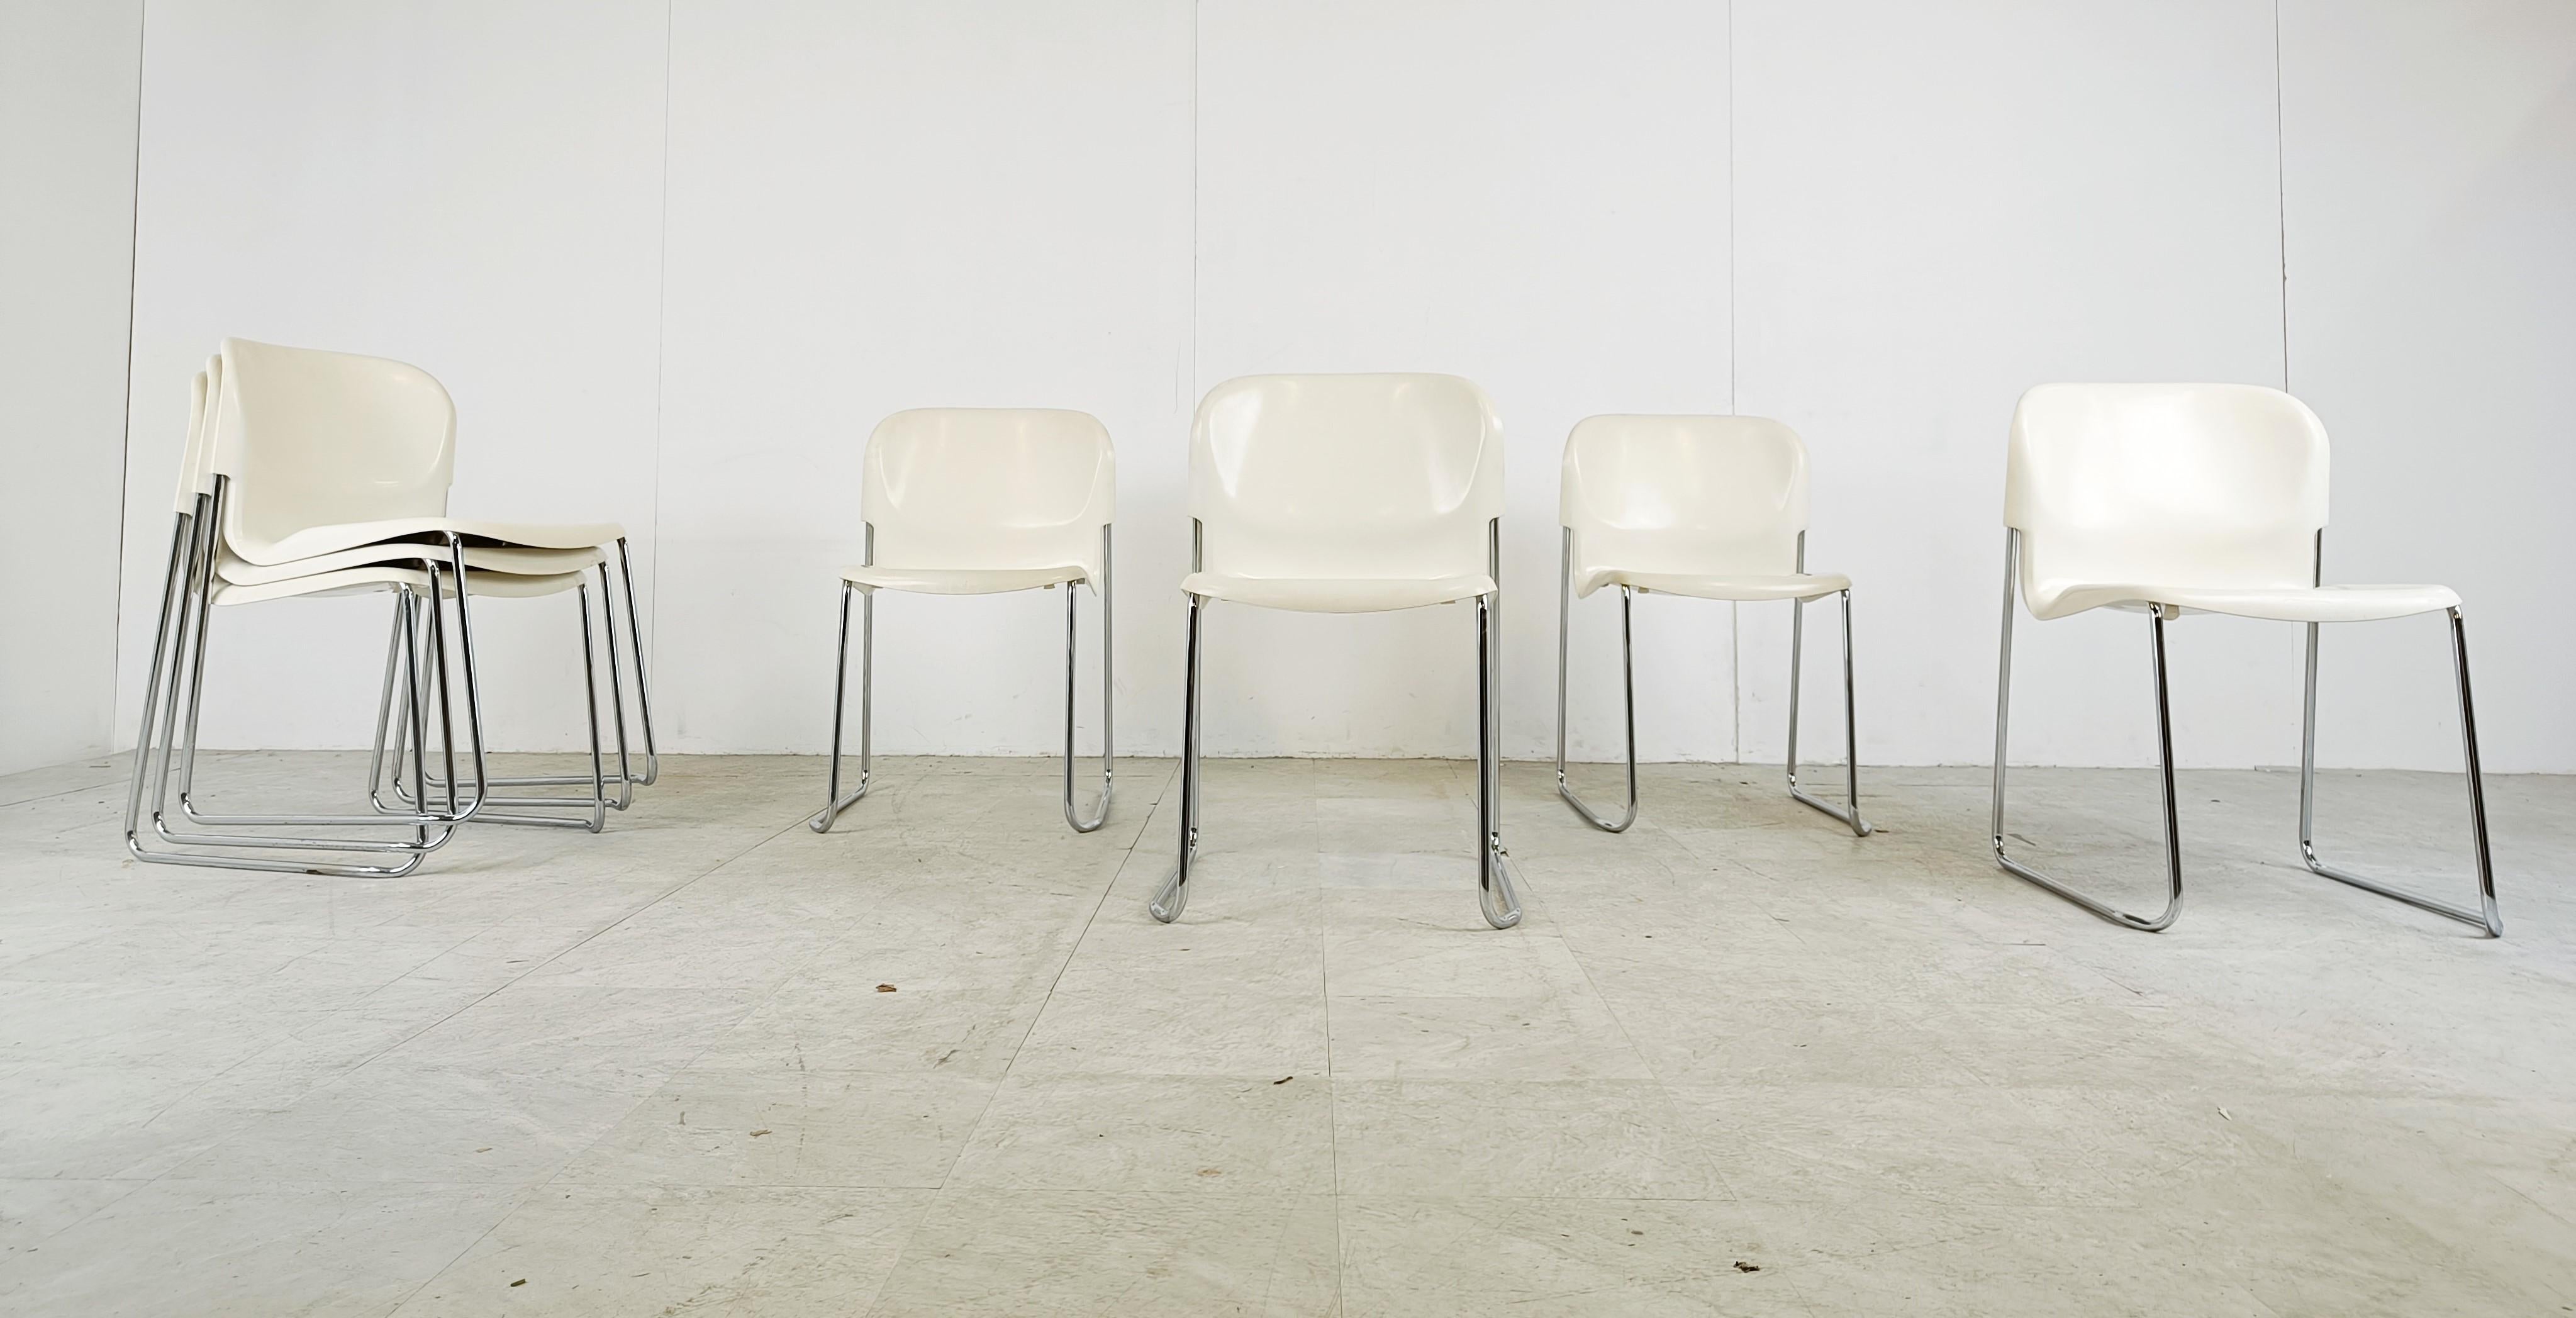 German Vintage Drabert SM400 stacking chairs by Gerd Lange, 1980s For Sale